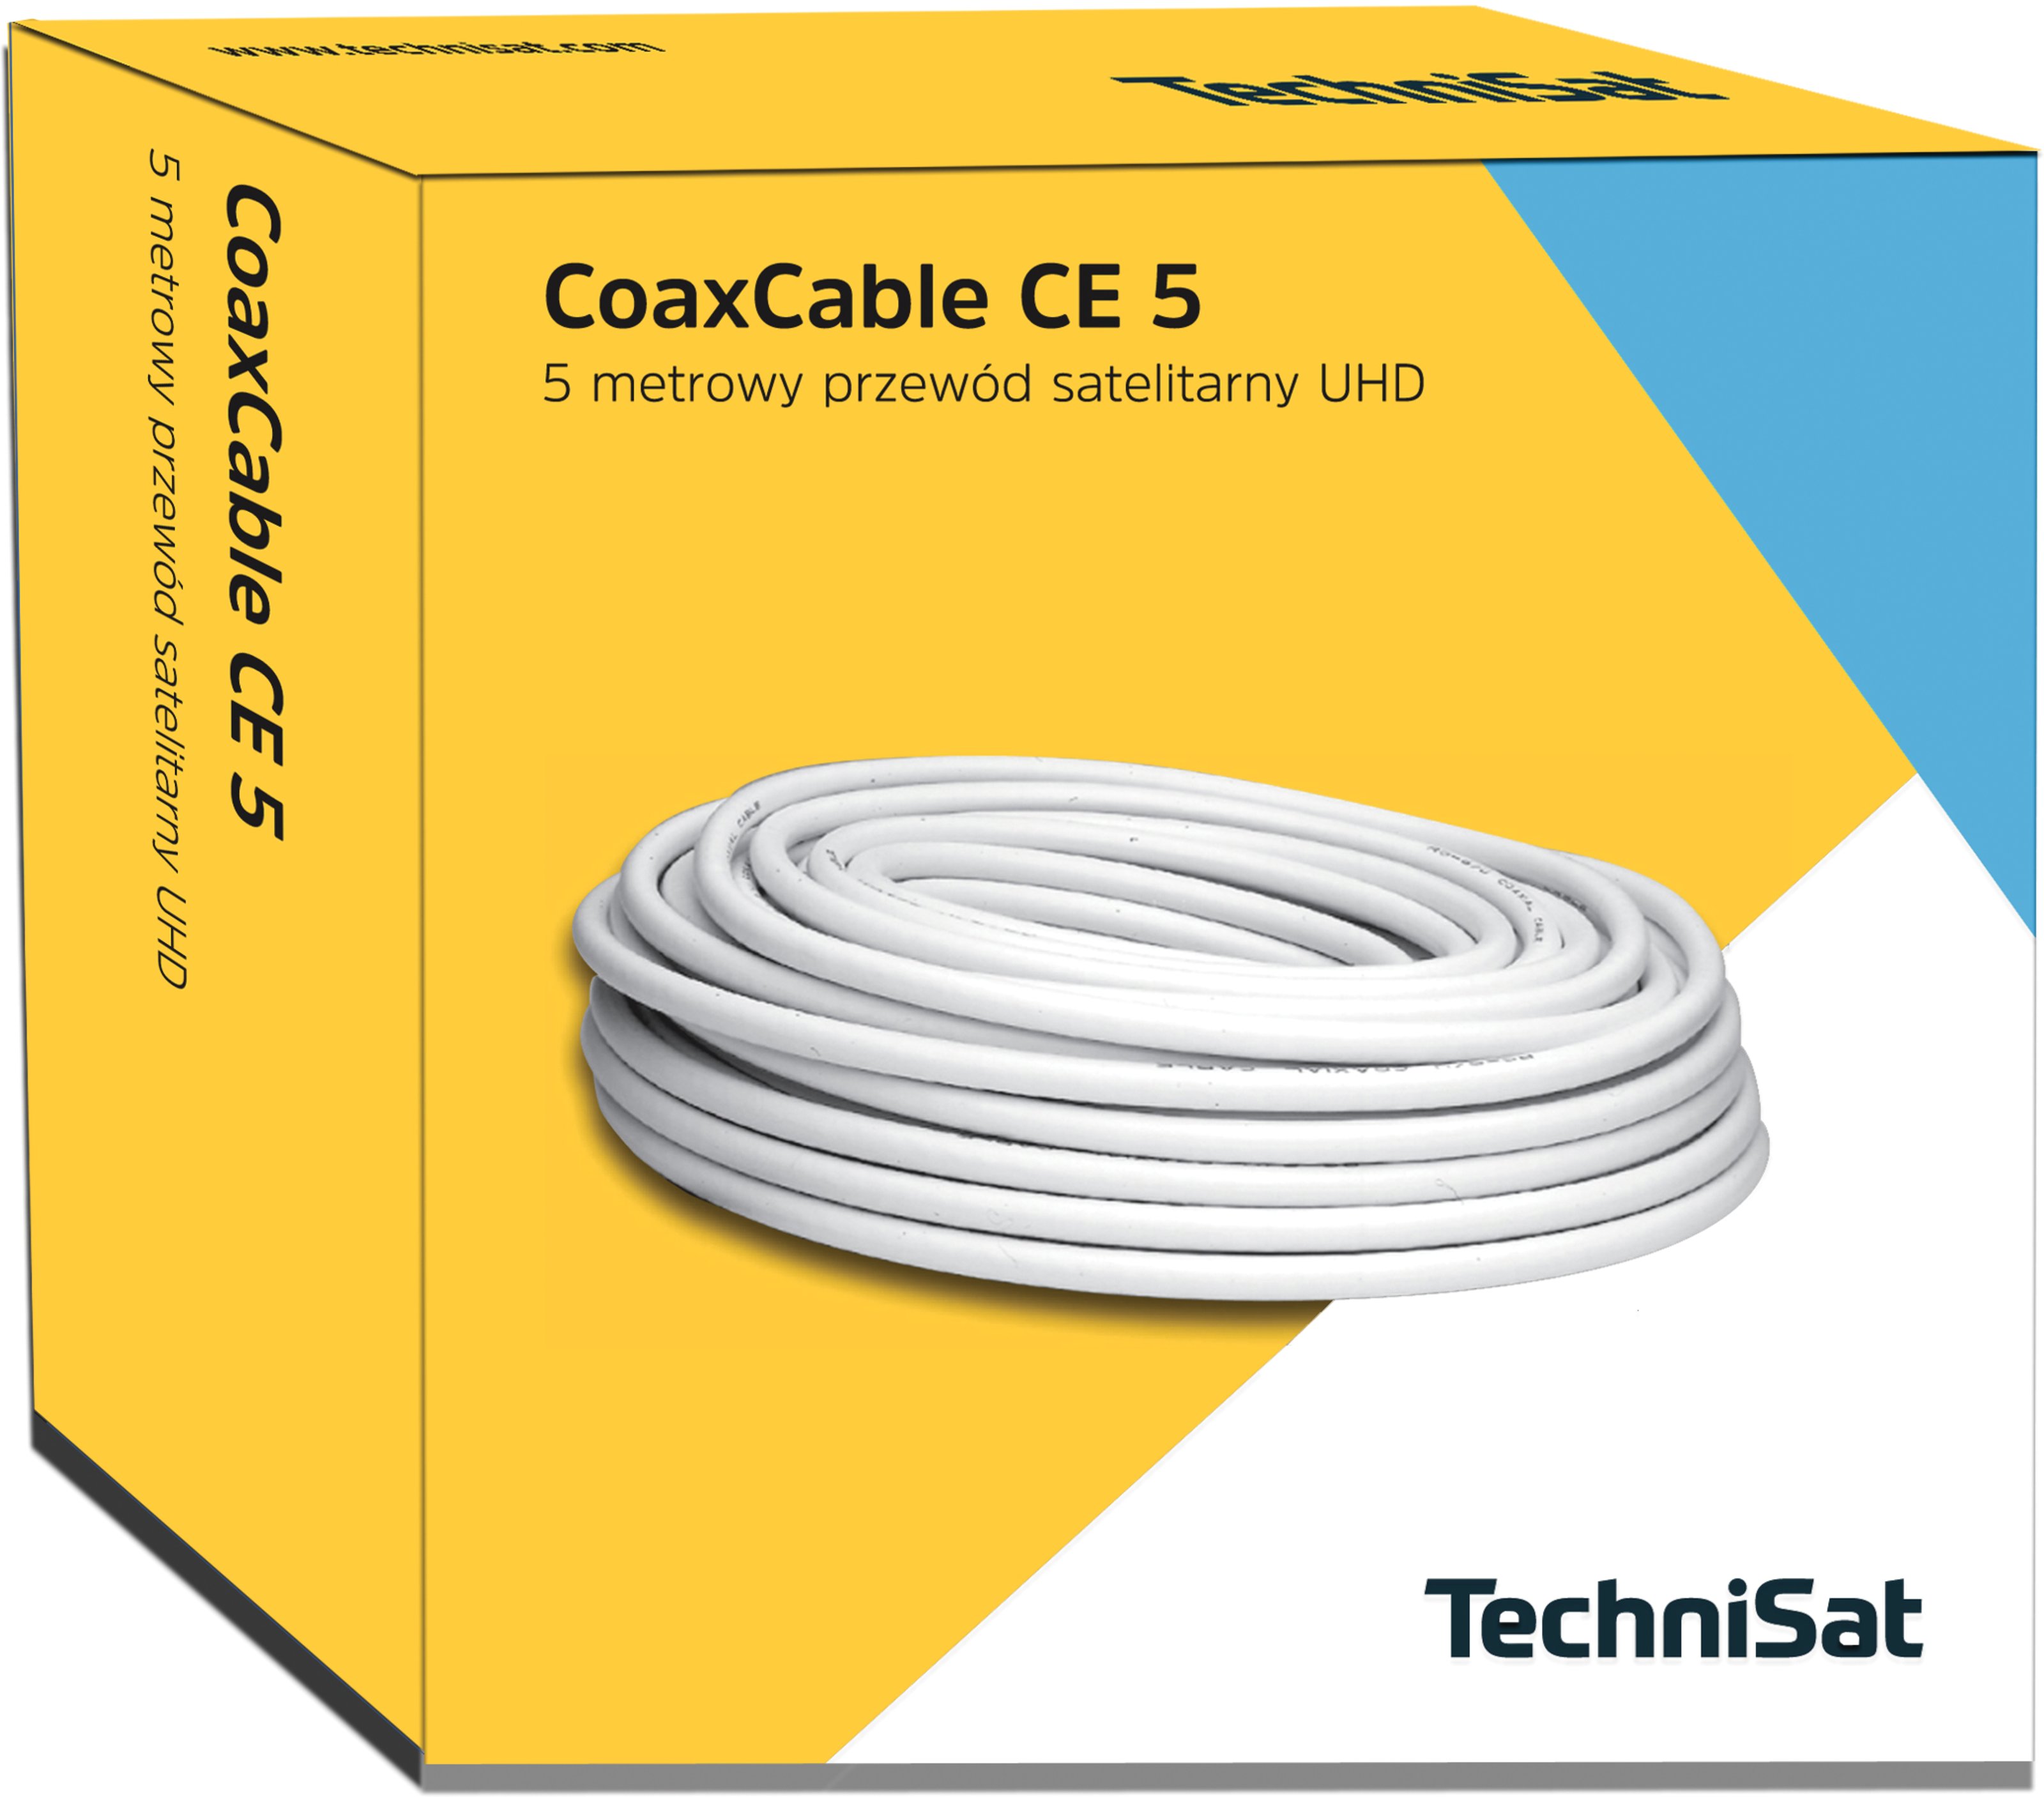 COAXCable CE 5